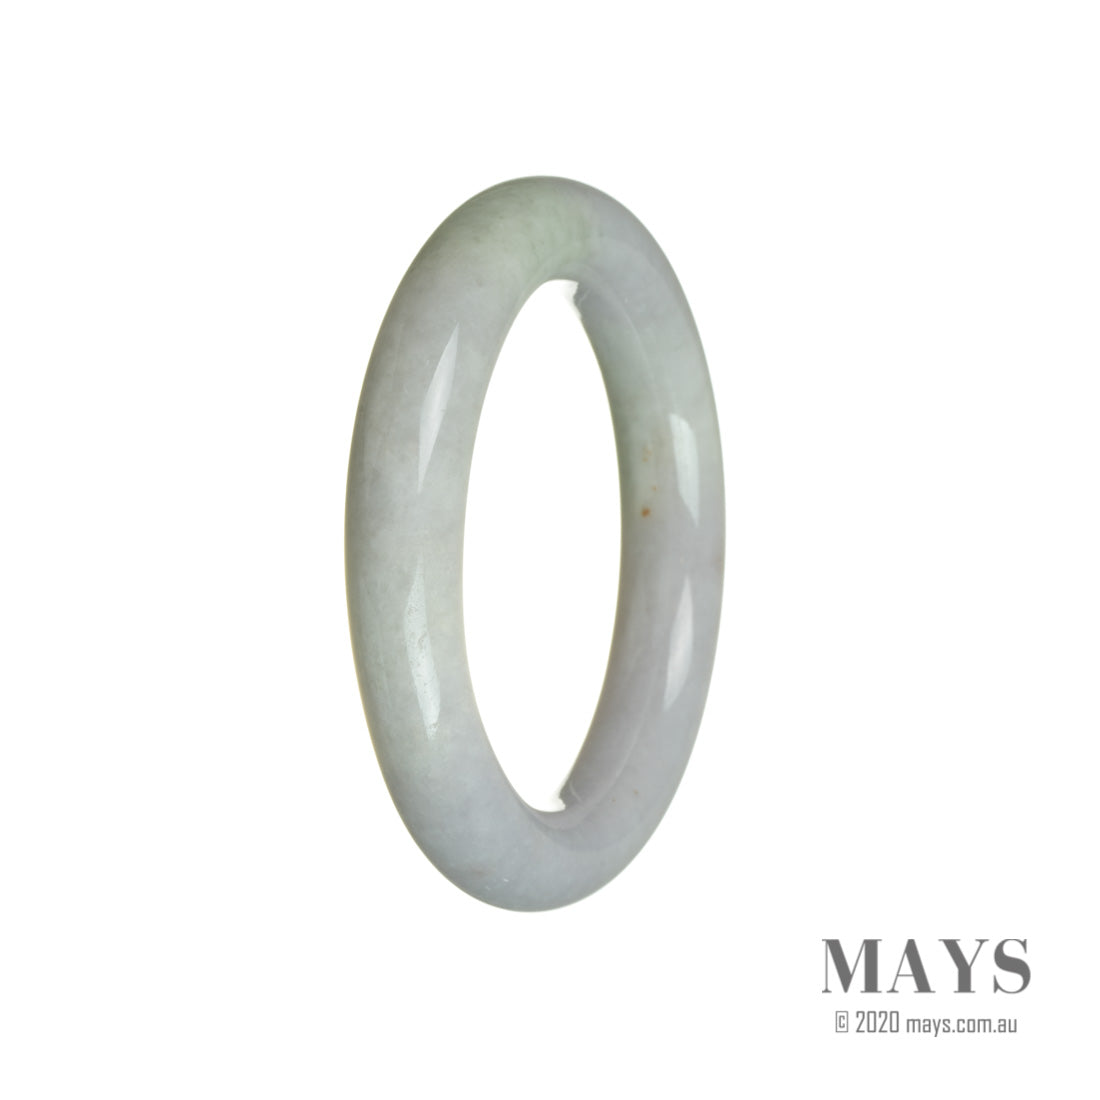 A round traditional jade bangle in lavender with green accents, certified as Type A. The bangle measures 54mm in diameter and is a product of MAYS™.